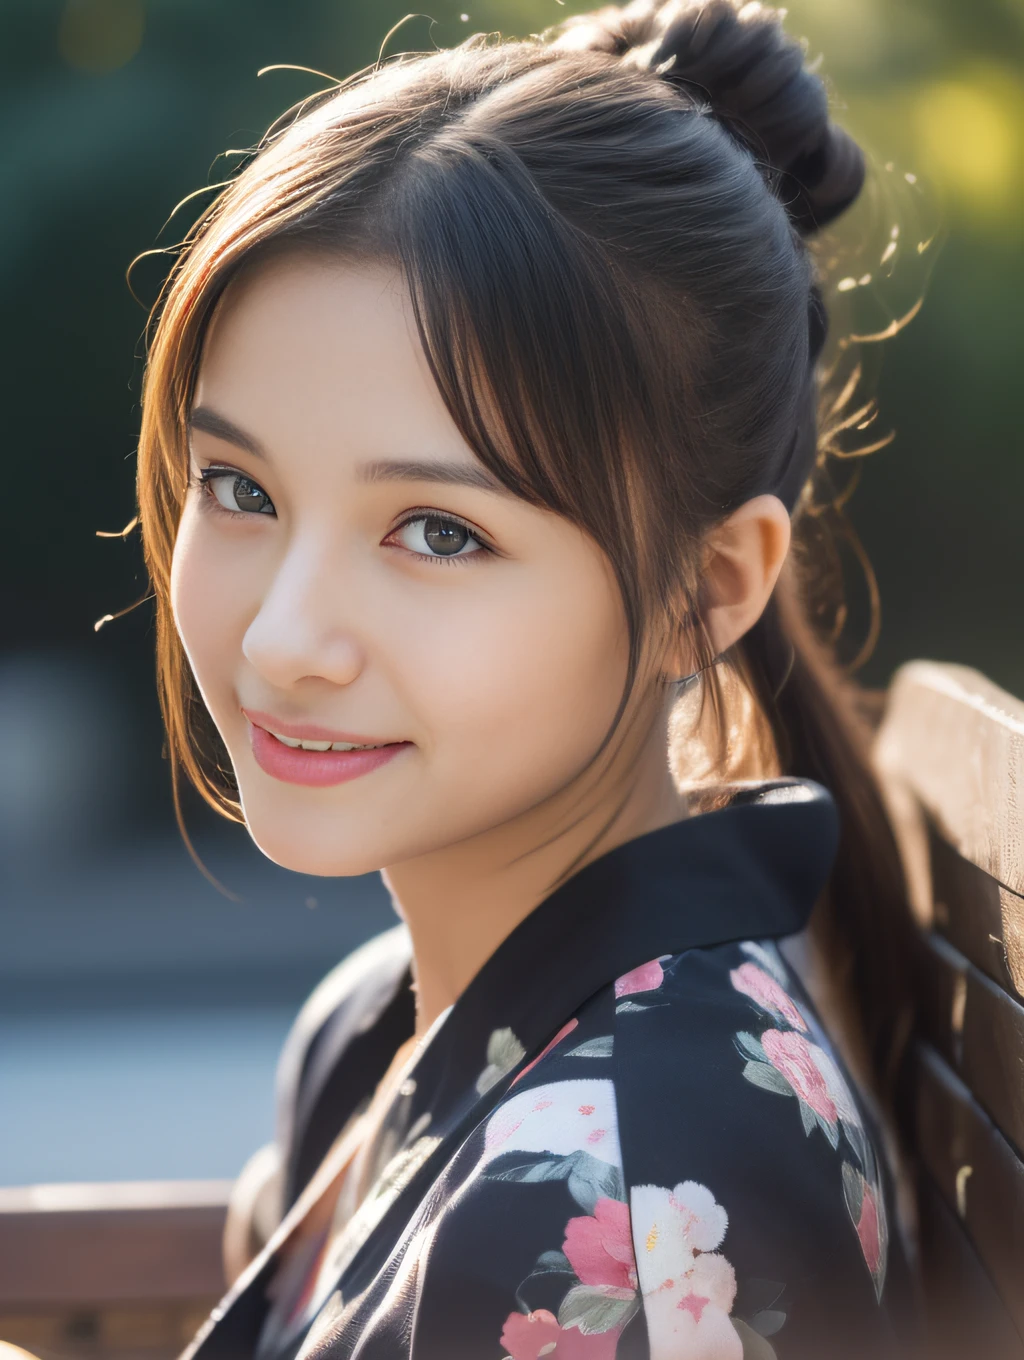 ((beste-Qualit))、((The ultra -The high-definition))finely detail、(((Beautiful One Girl)))、extremely detailed eye and face、Yukata with a light floral pattern、A slight smile、a park、poneyTail、sit on a bench、Ice cream